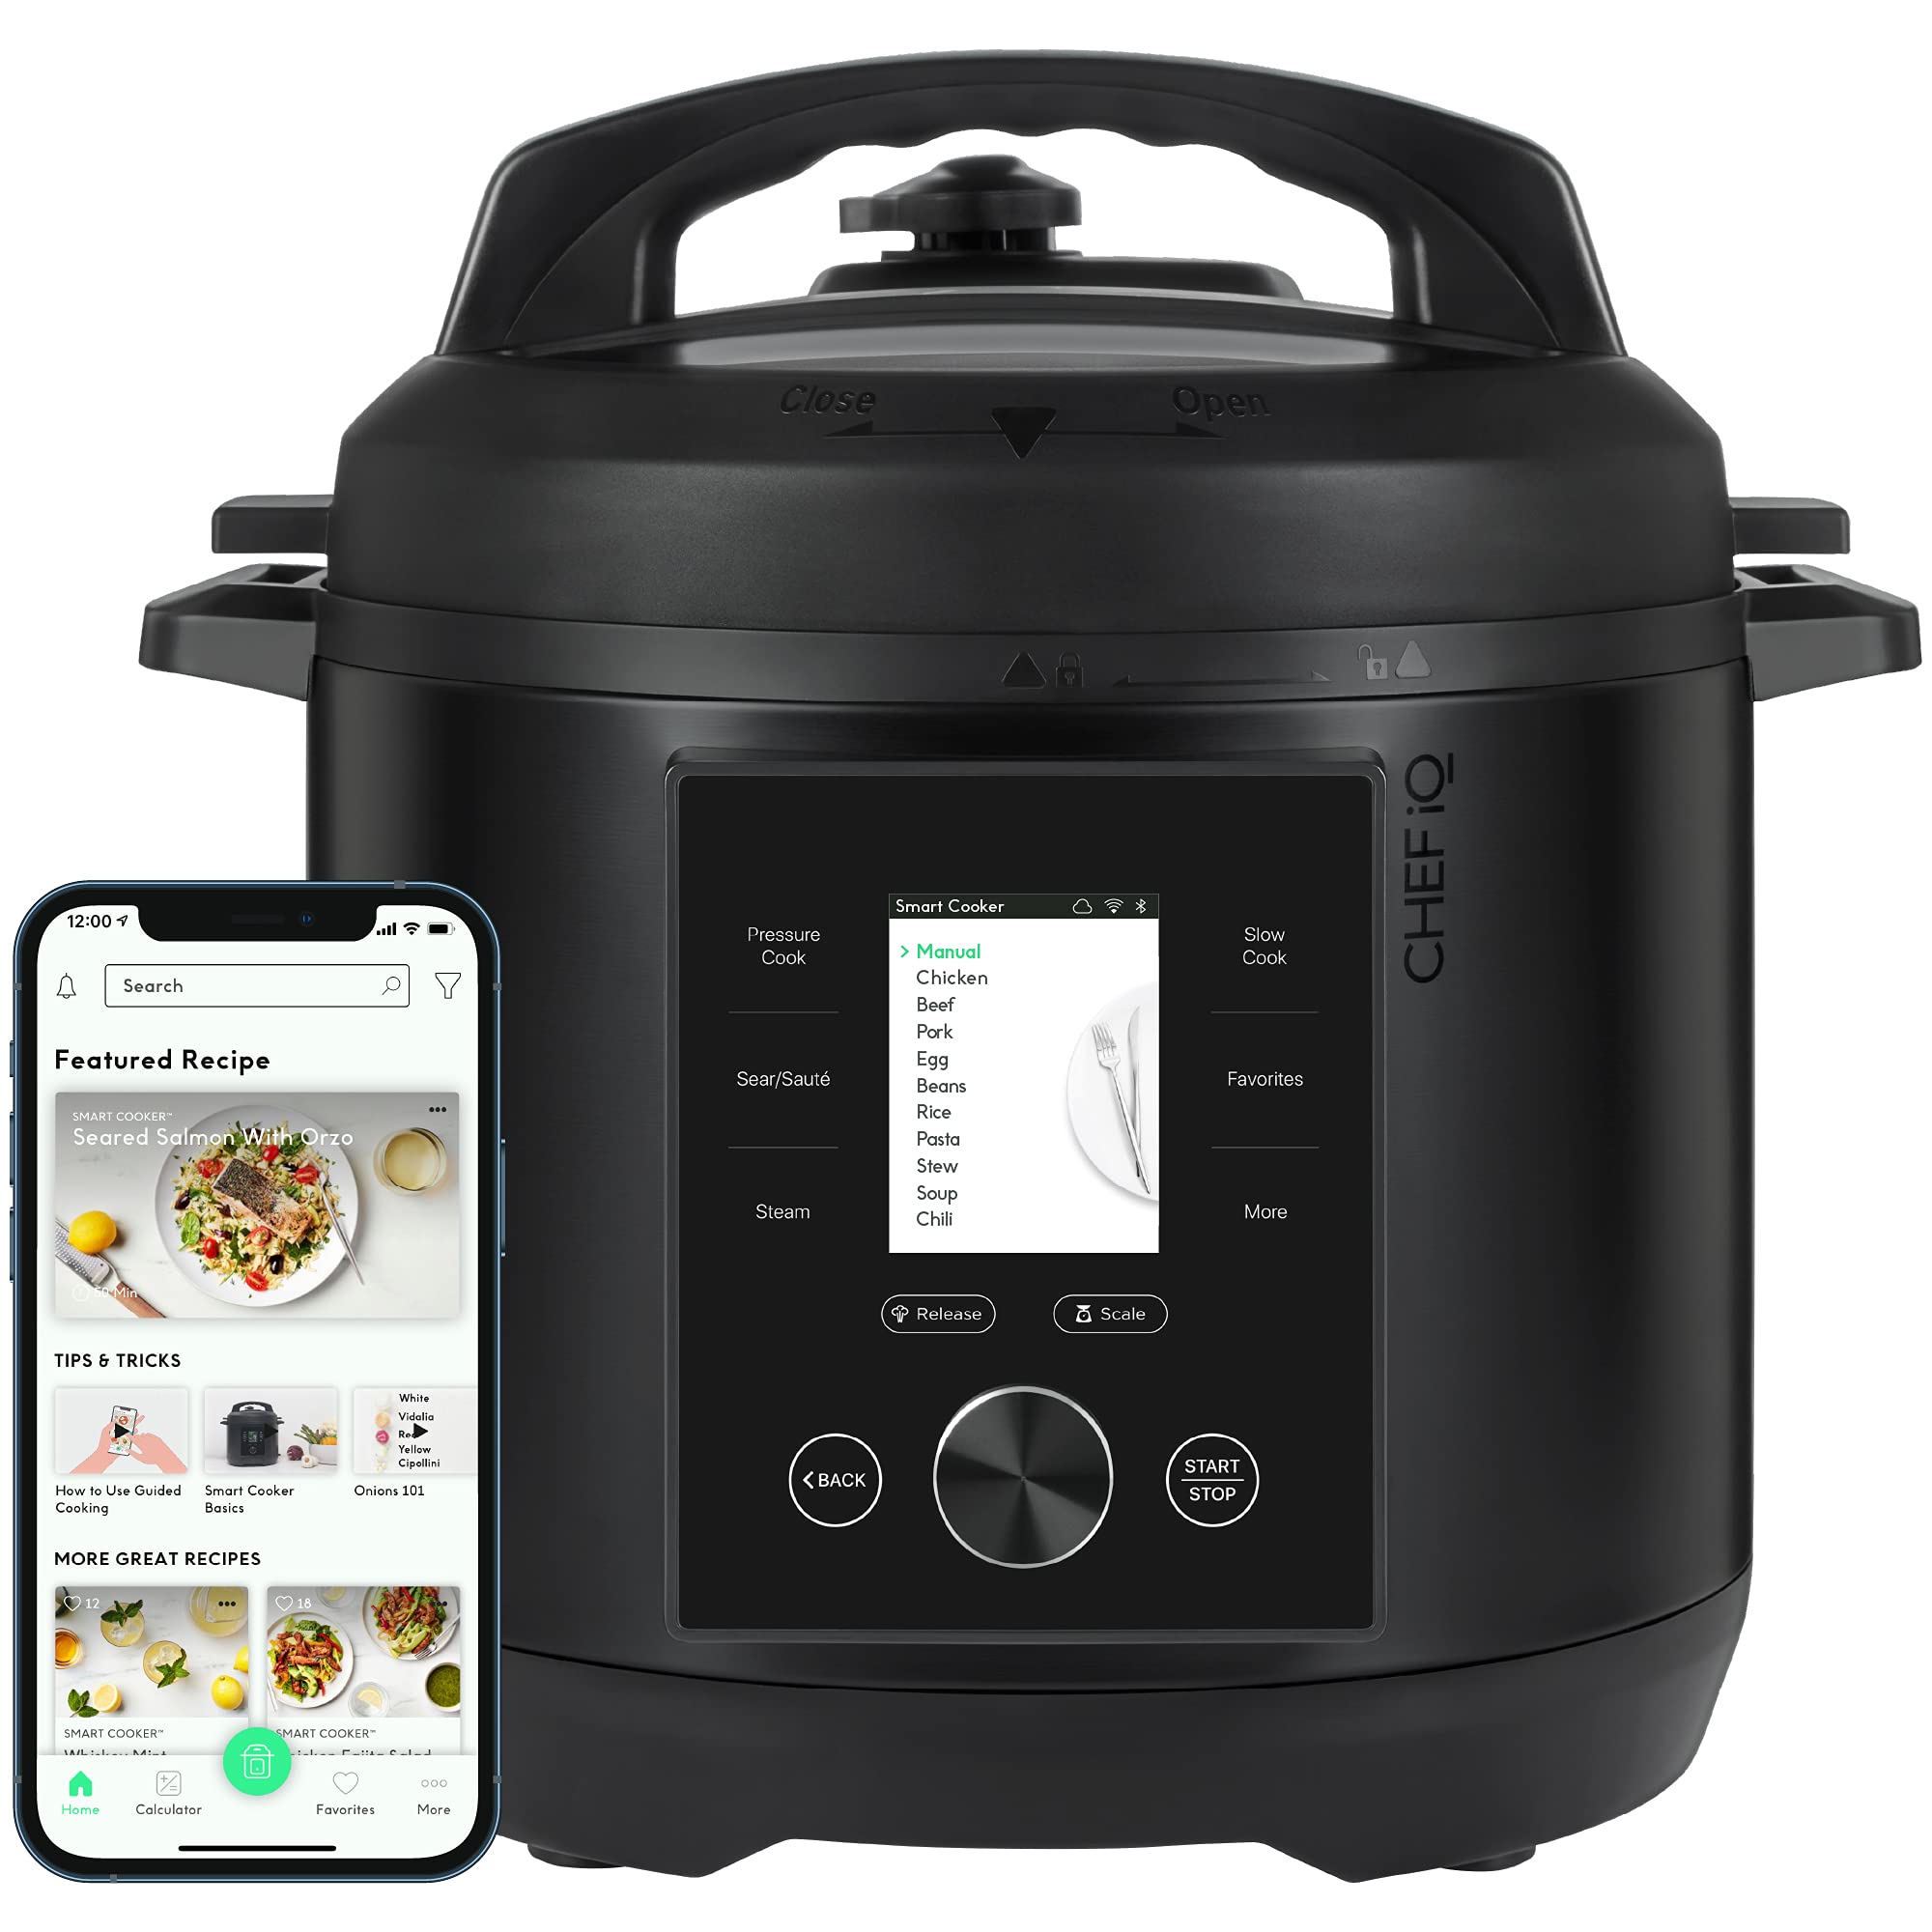 CHEF iQ Smart Pressure Cooker 10 Cooking Functions & 18 Features For $89.99!